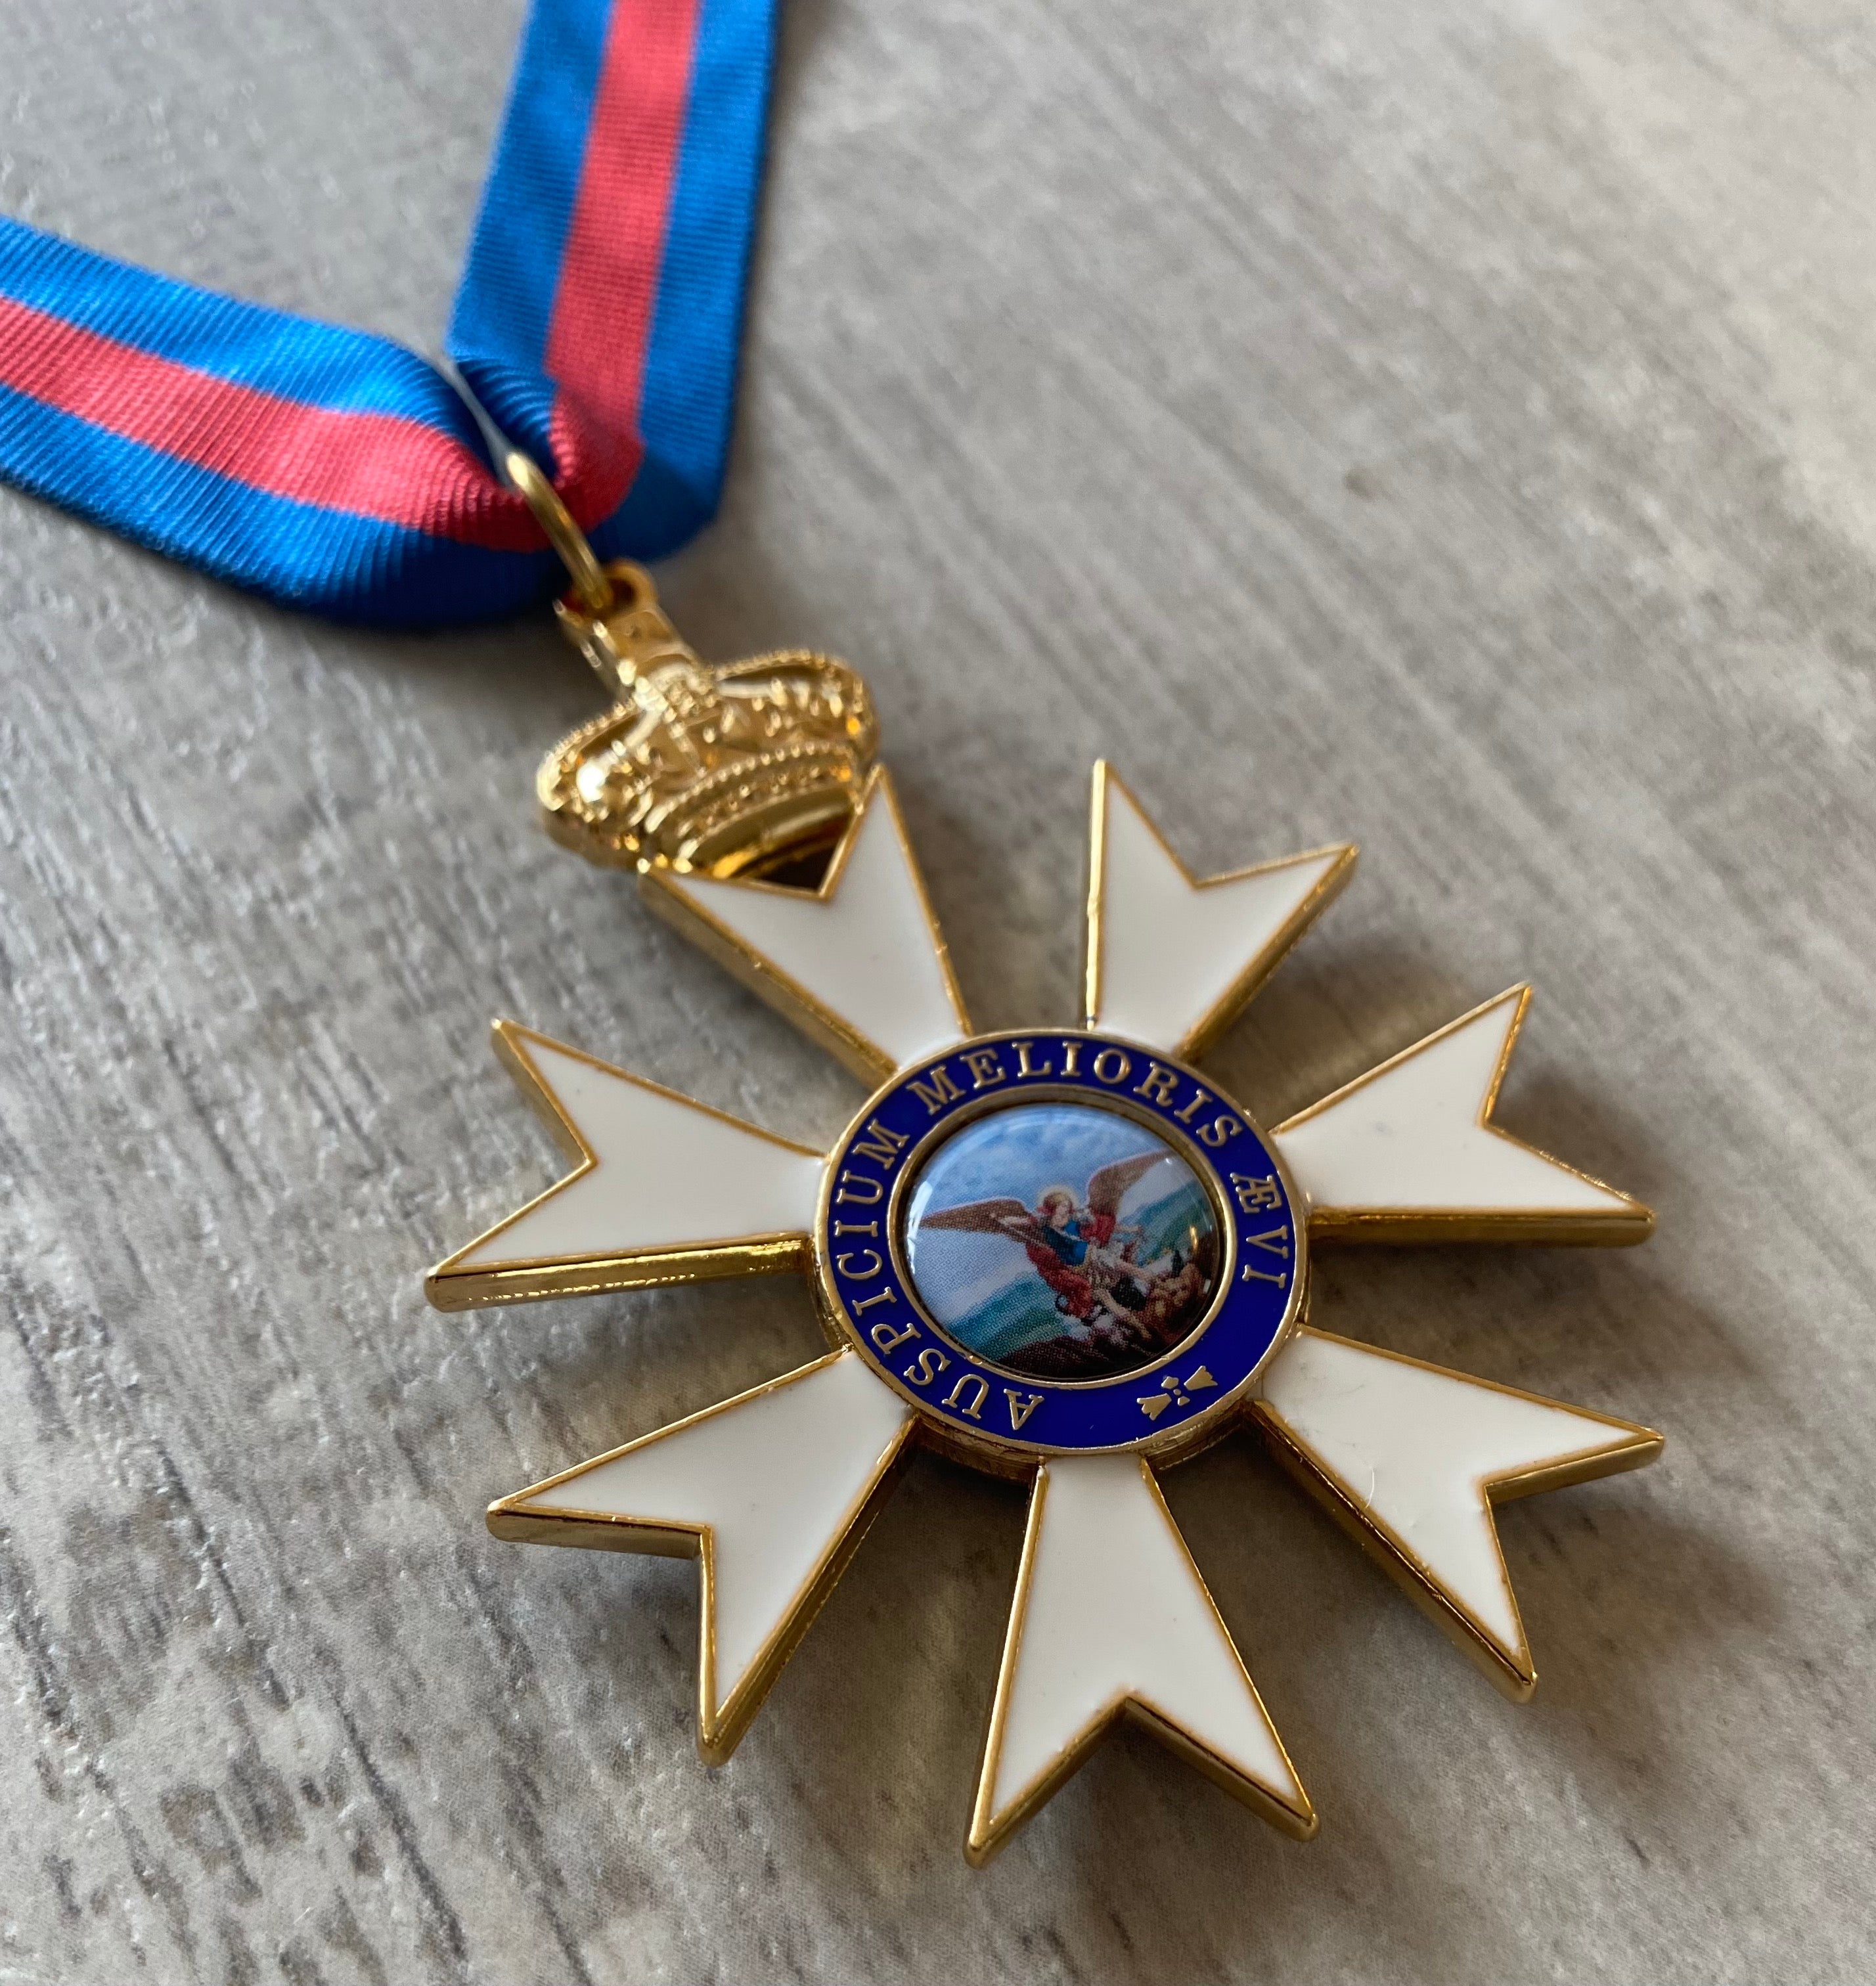 Companion Of The Order Of St. Michael & St. George - Foxhole Medals